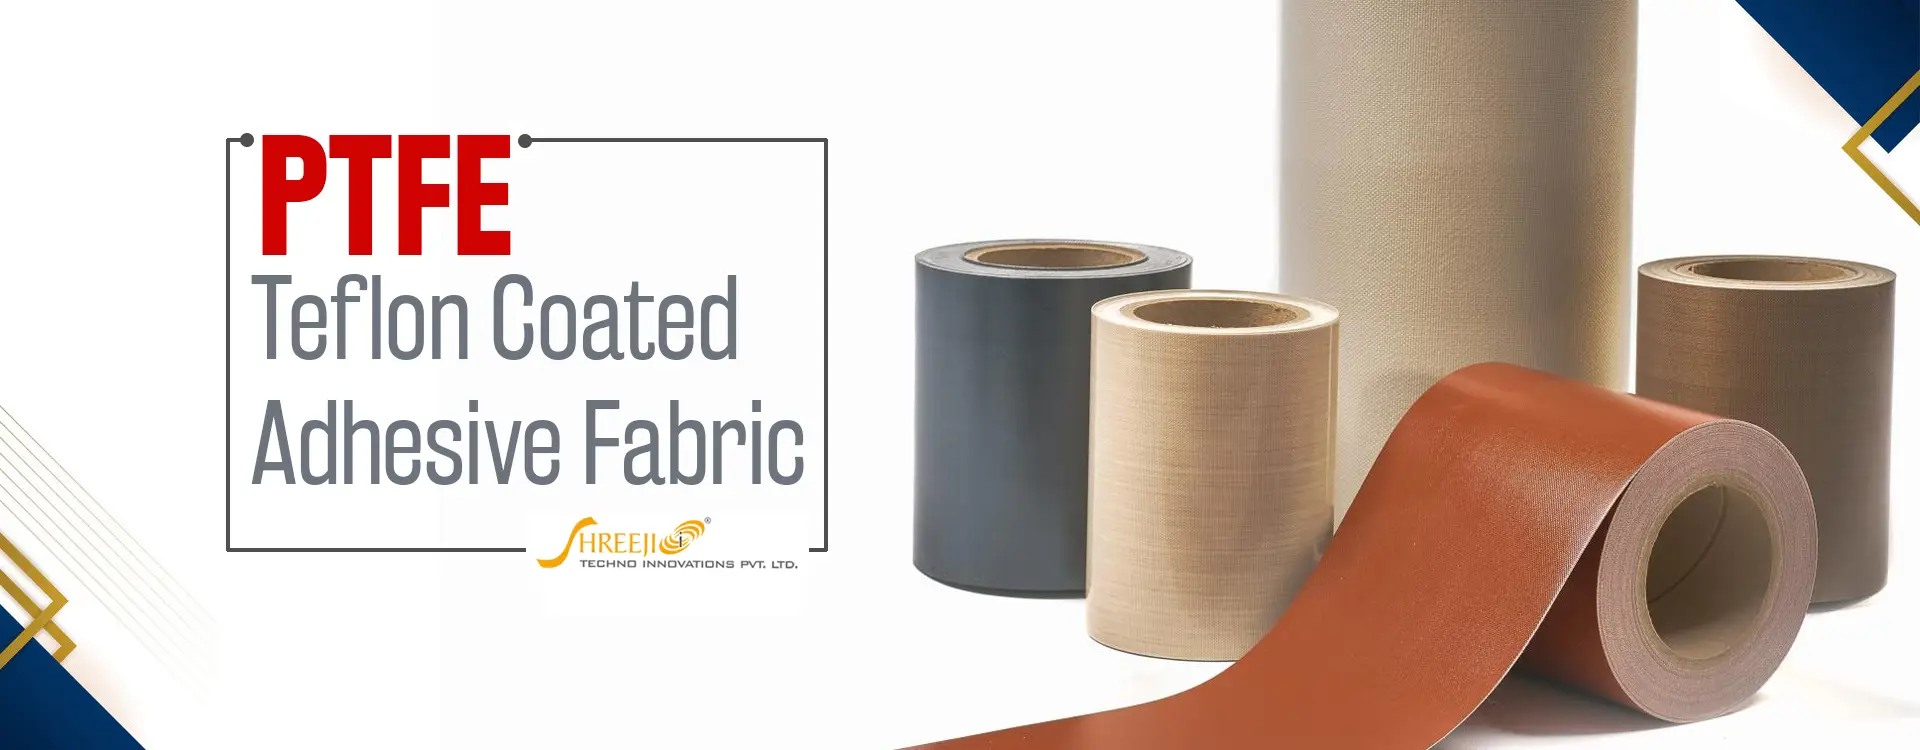 industrial fabric supplier